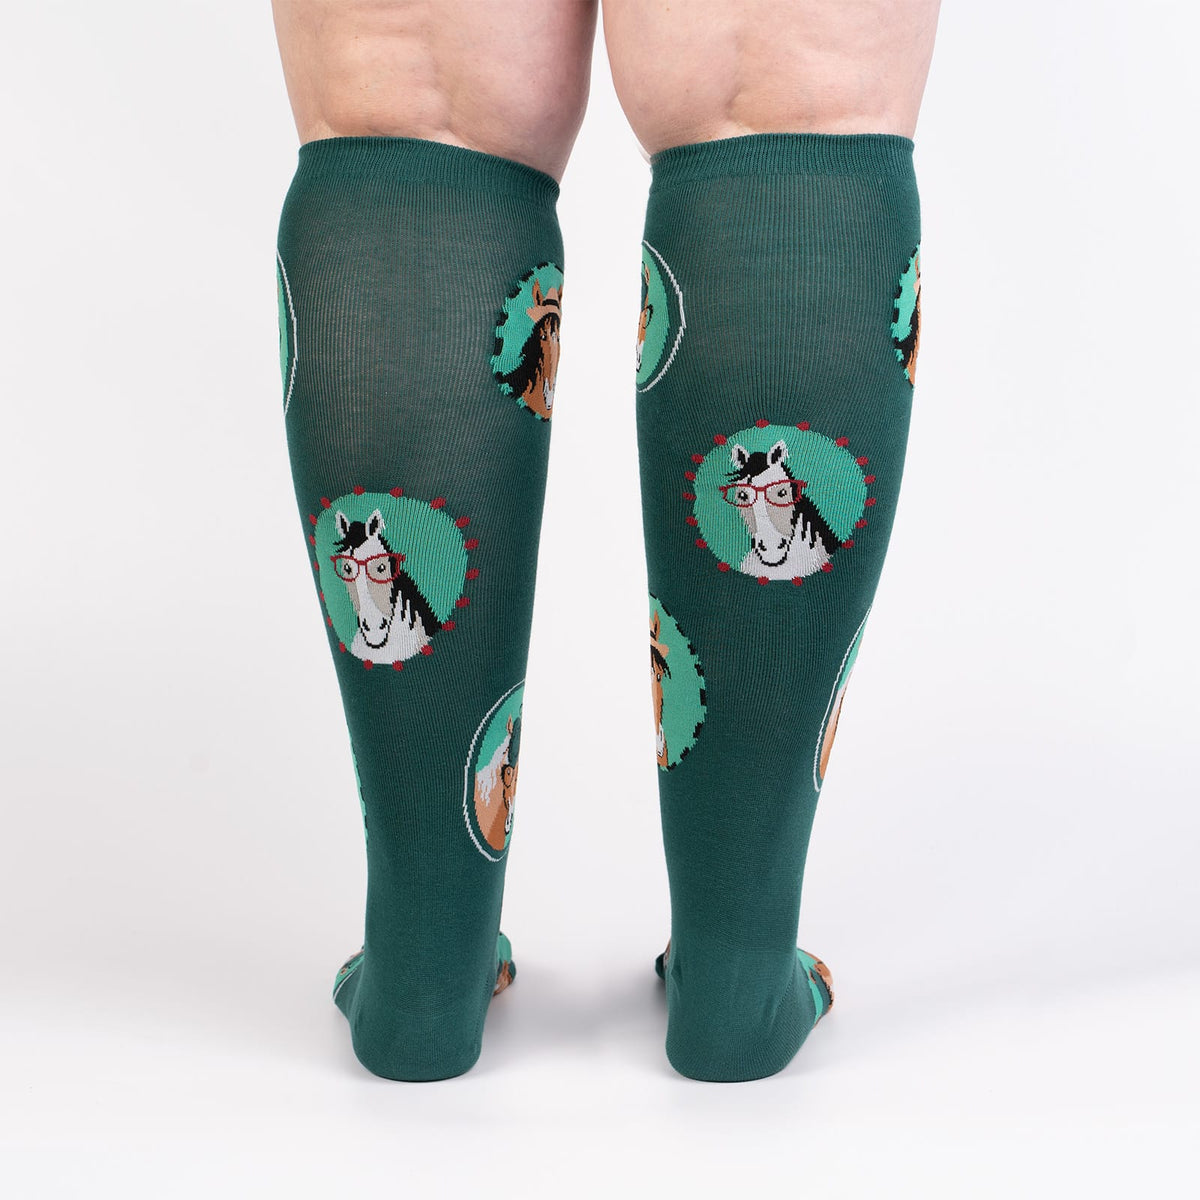 Sock It To Me Horsing Around extra-stretchy women&#39;s and men&#39;s knee high socks featuring teal socks with pictures of horses wearing hats and/or glasses. Socks shown on model from back